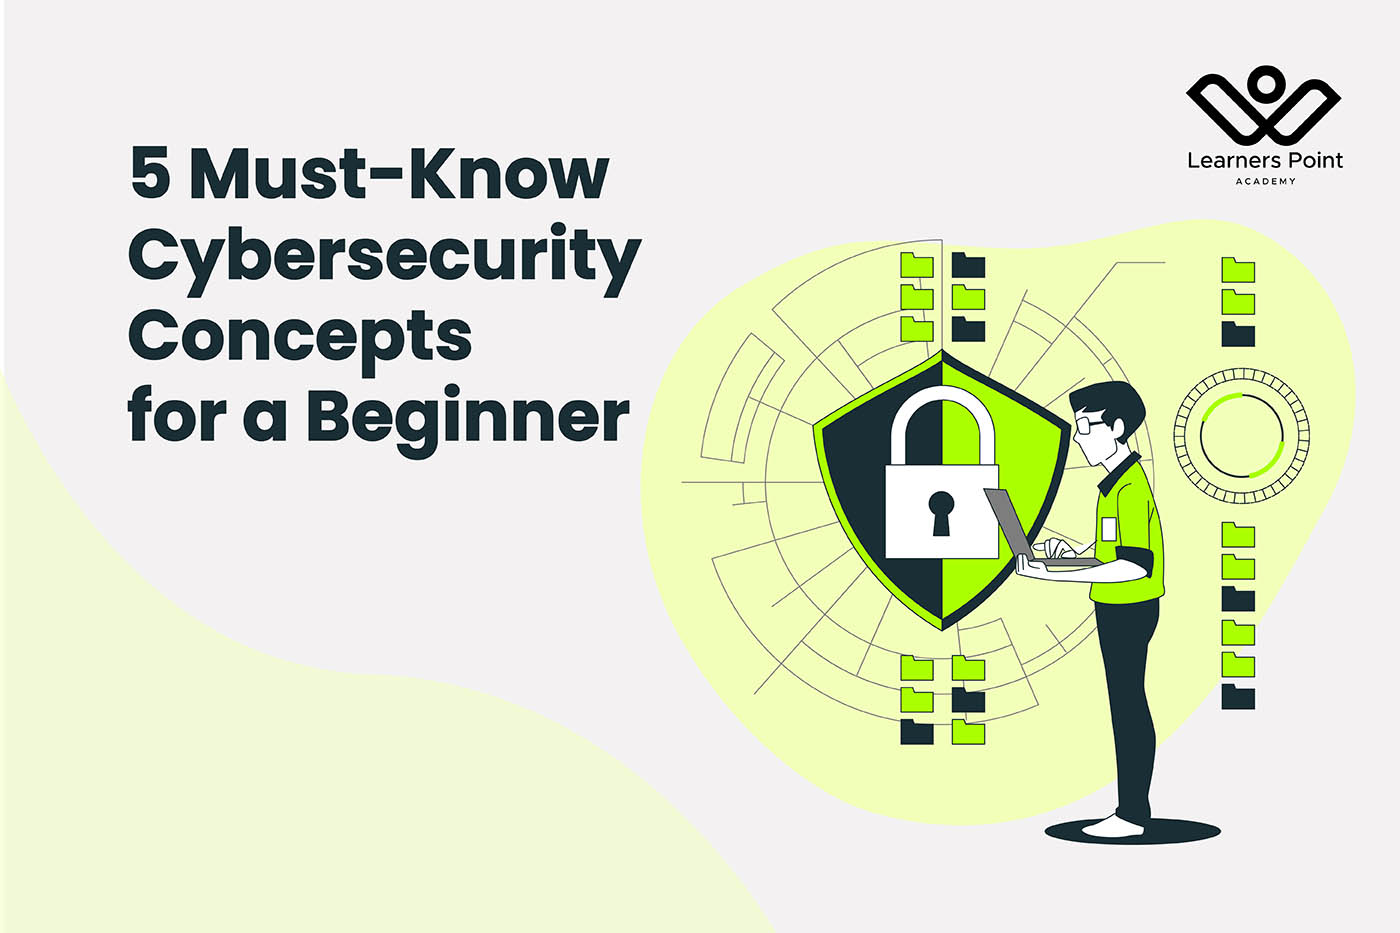 5 Must-Know Cybersecurity Concepts for a Beginner